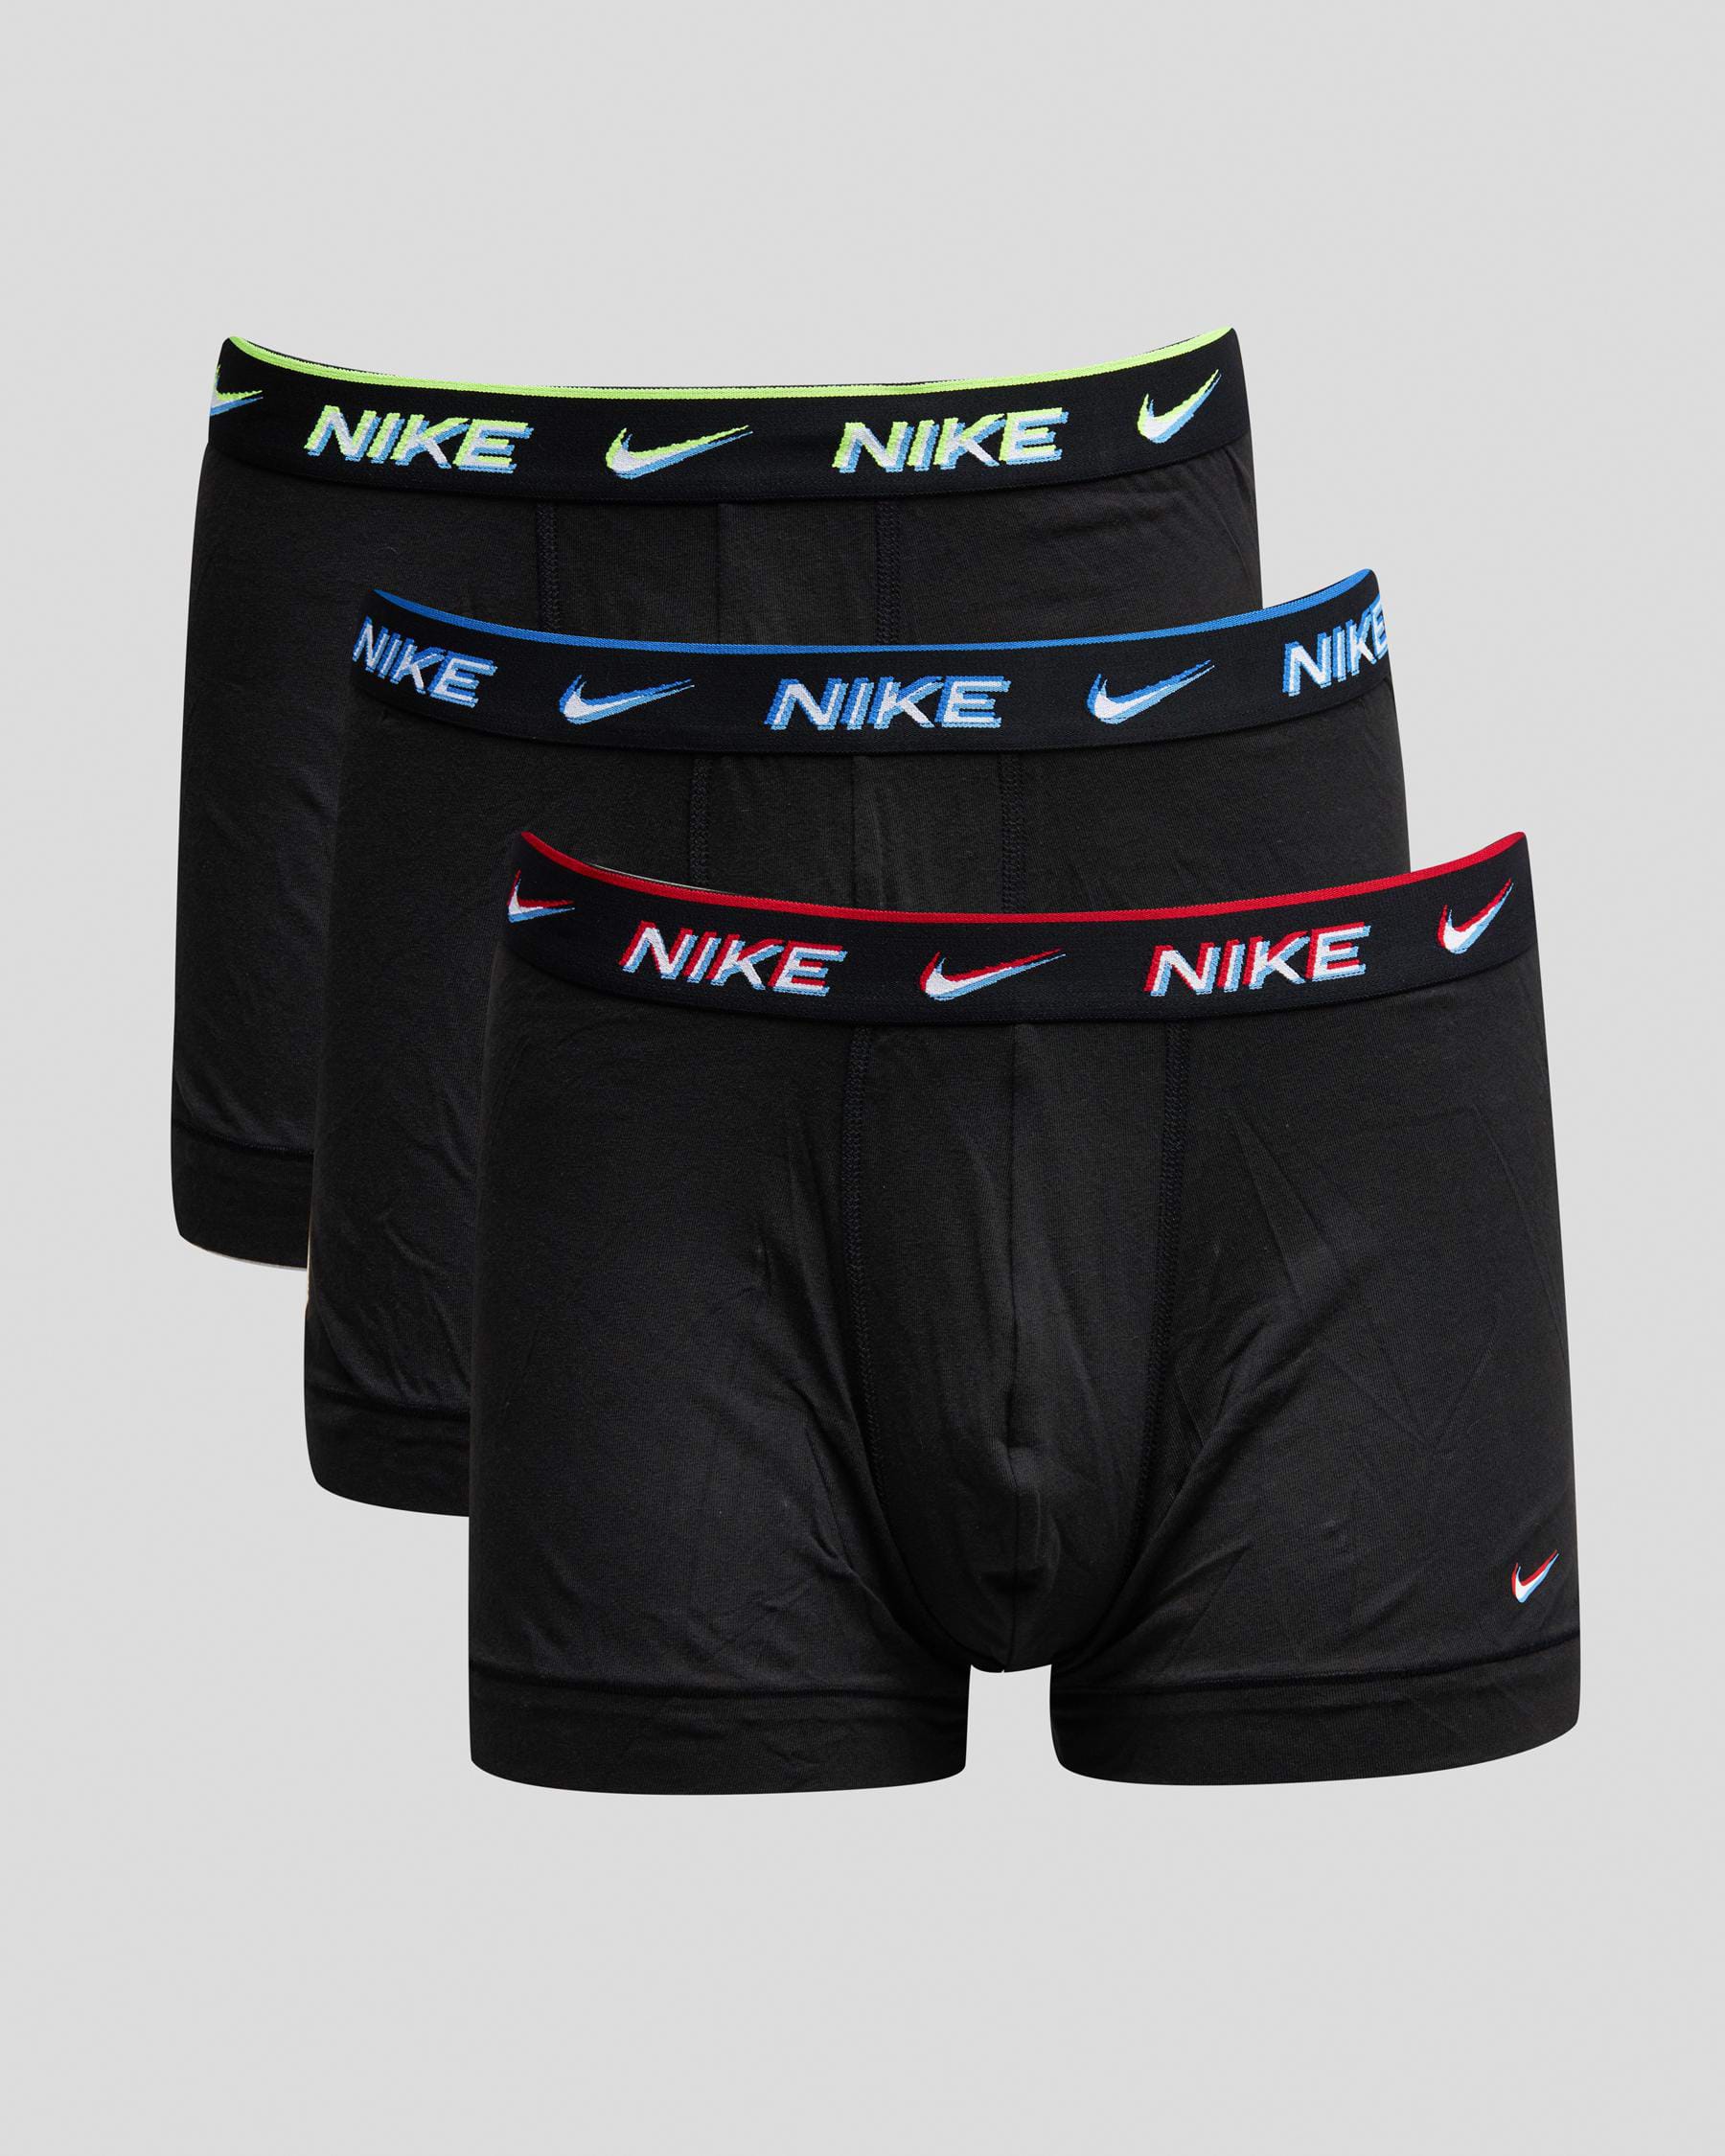 Nike Everyday Cotton Stretch Trunk 3 Pack In Black/transparency Wb ...